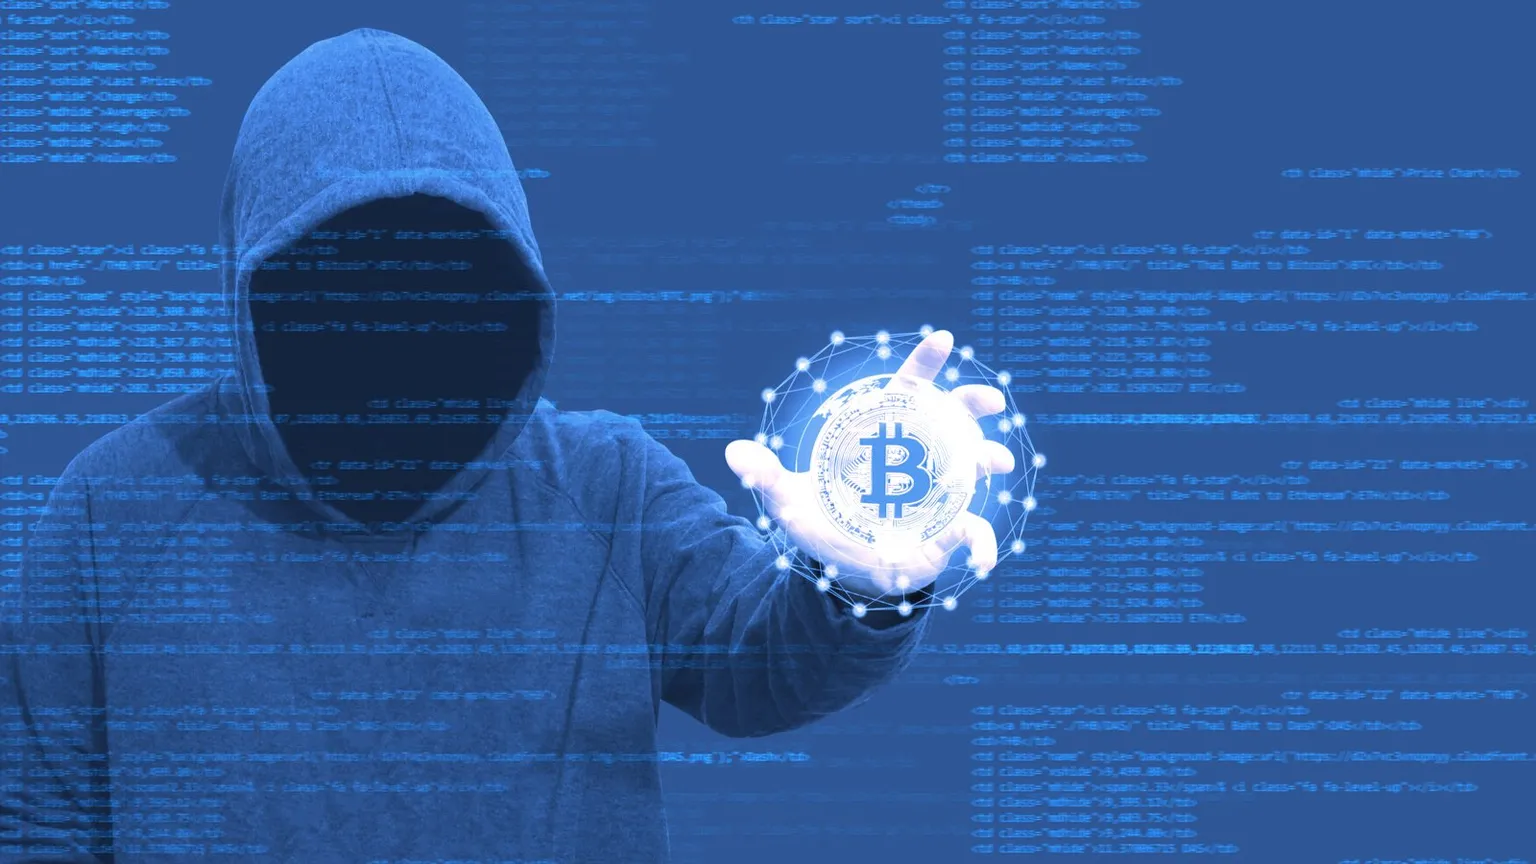 Bitcoin and hackers. Image: Shutterstock